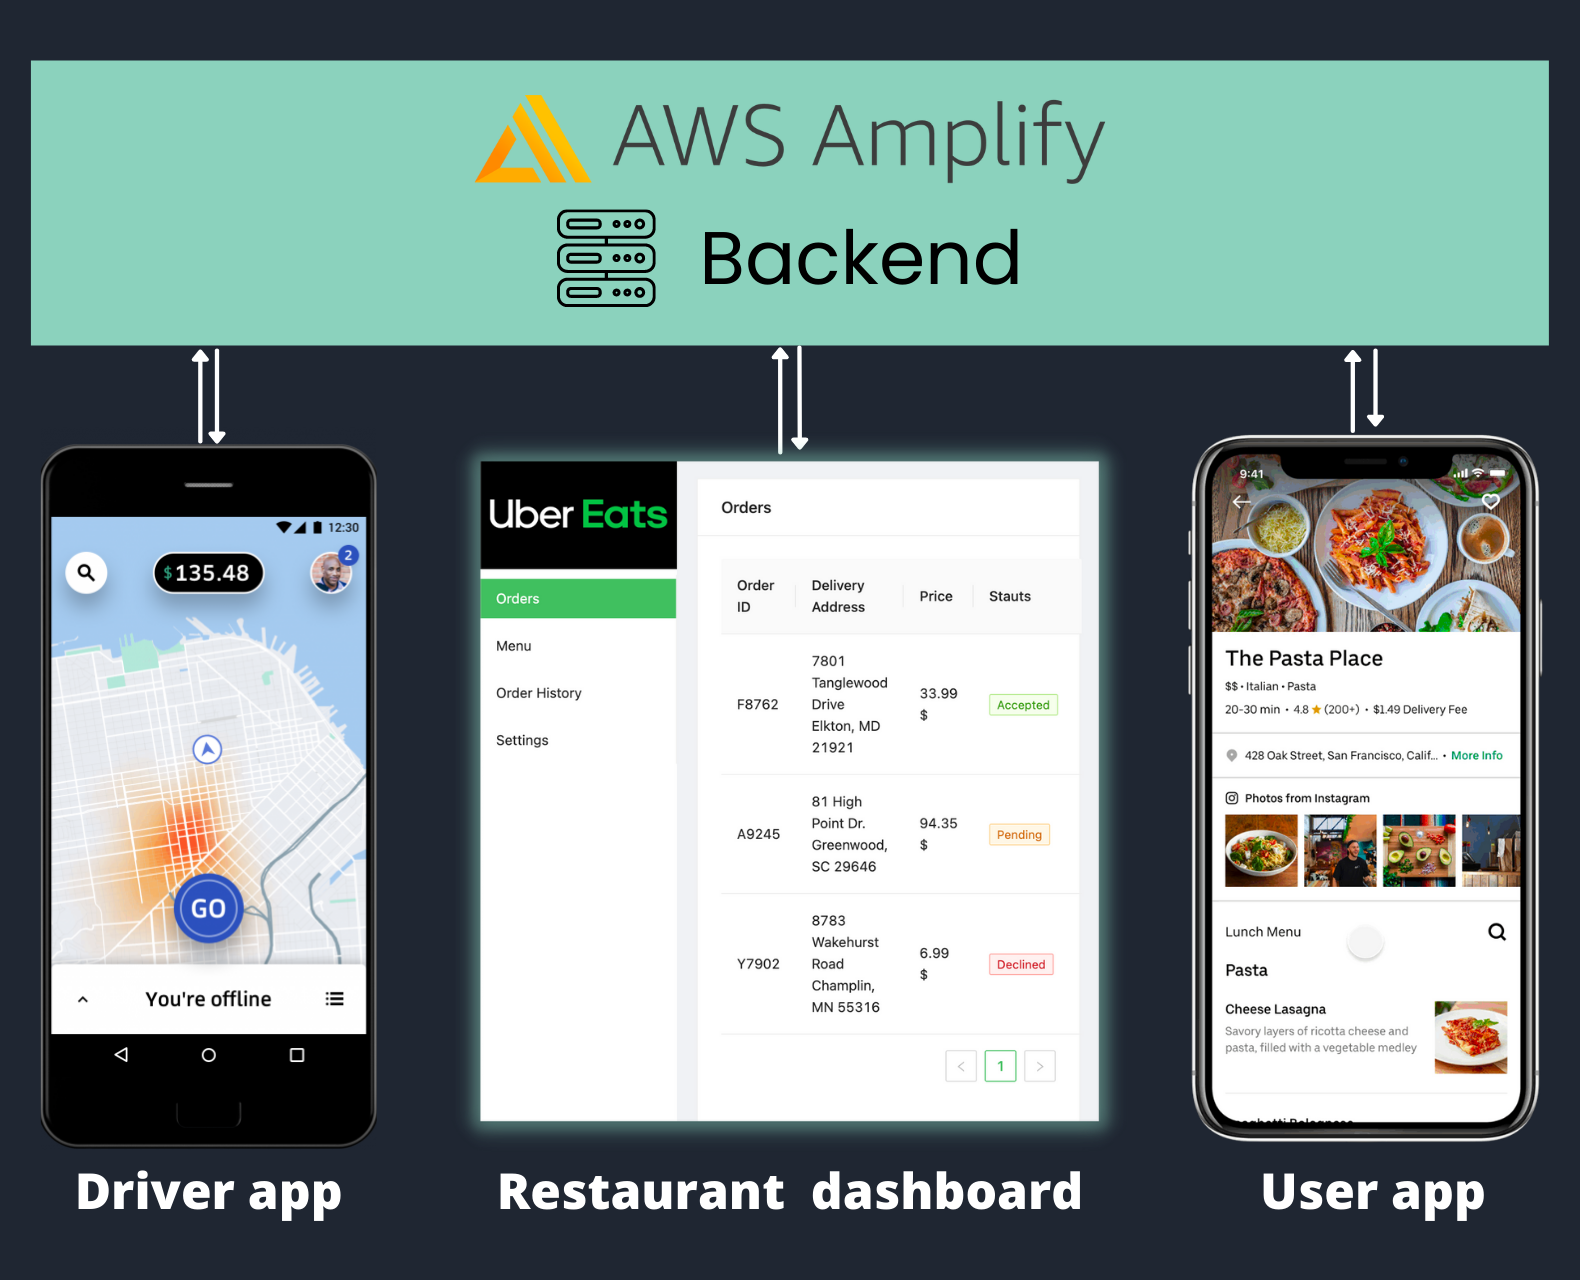 3 apps that we will build: Driver, user and restaurant app